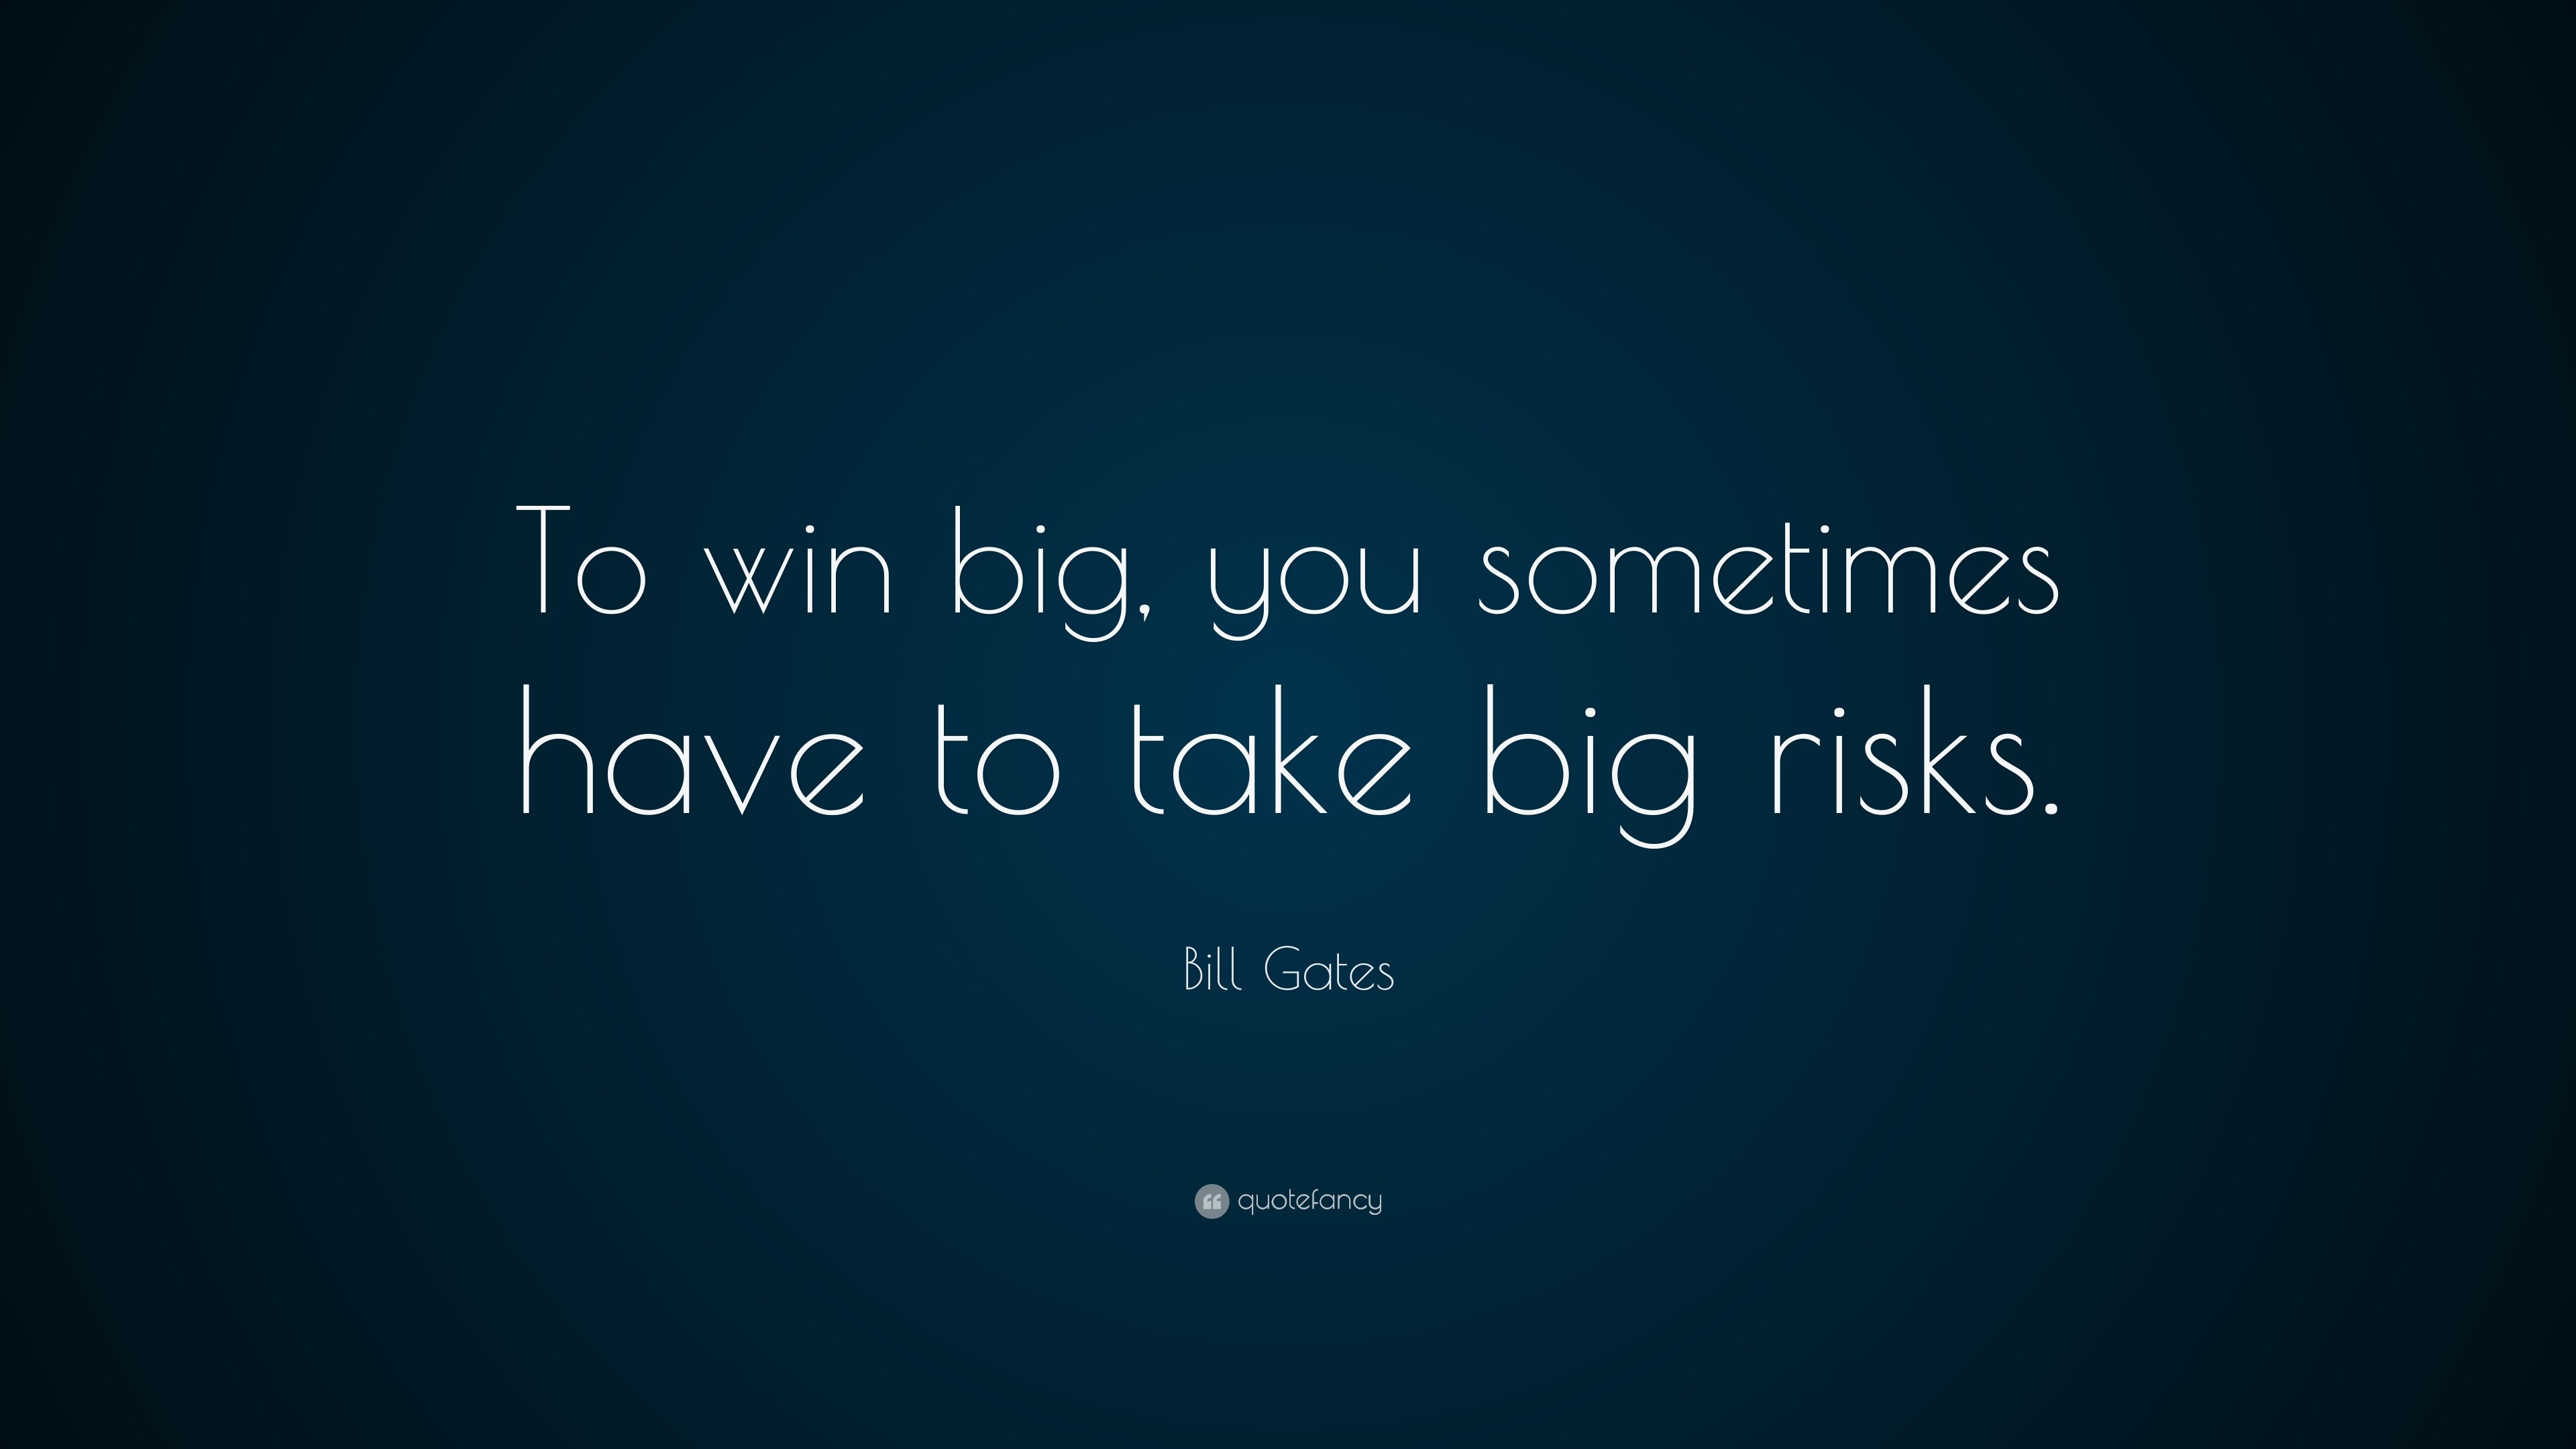 3840x2160 Bill Gates Quote: “To win big, you sometimes have to take big risks